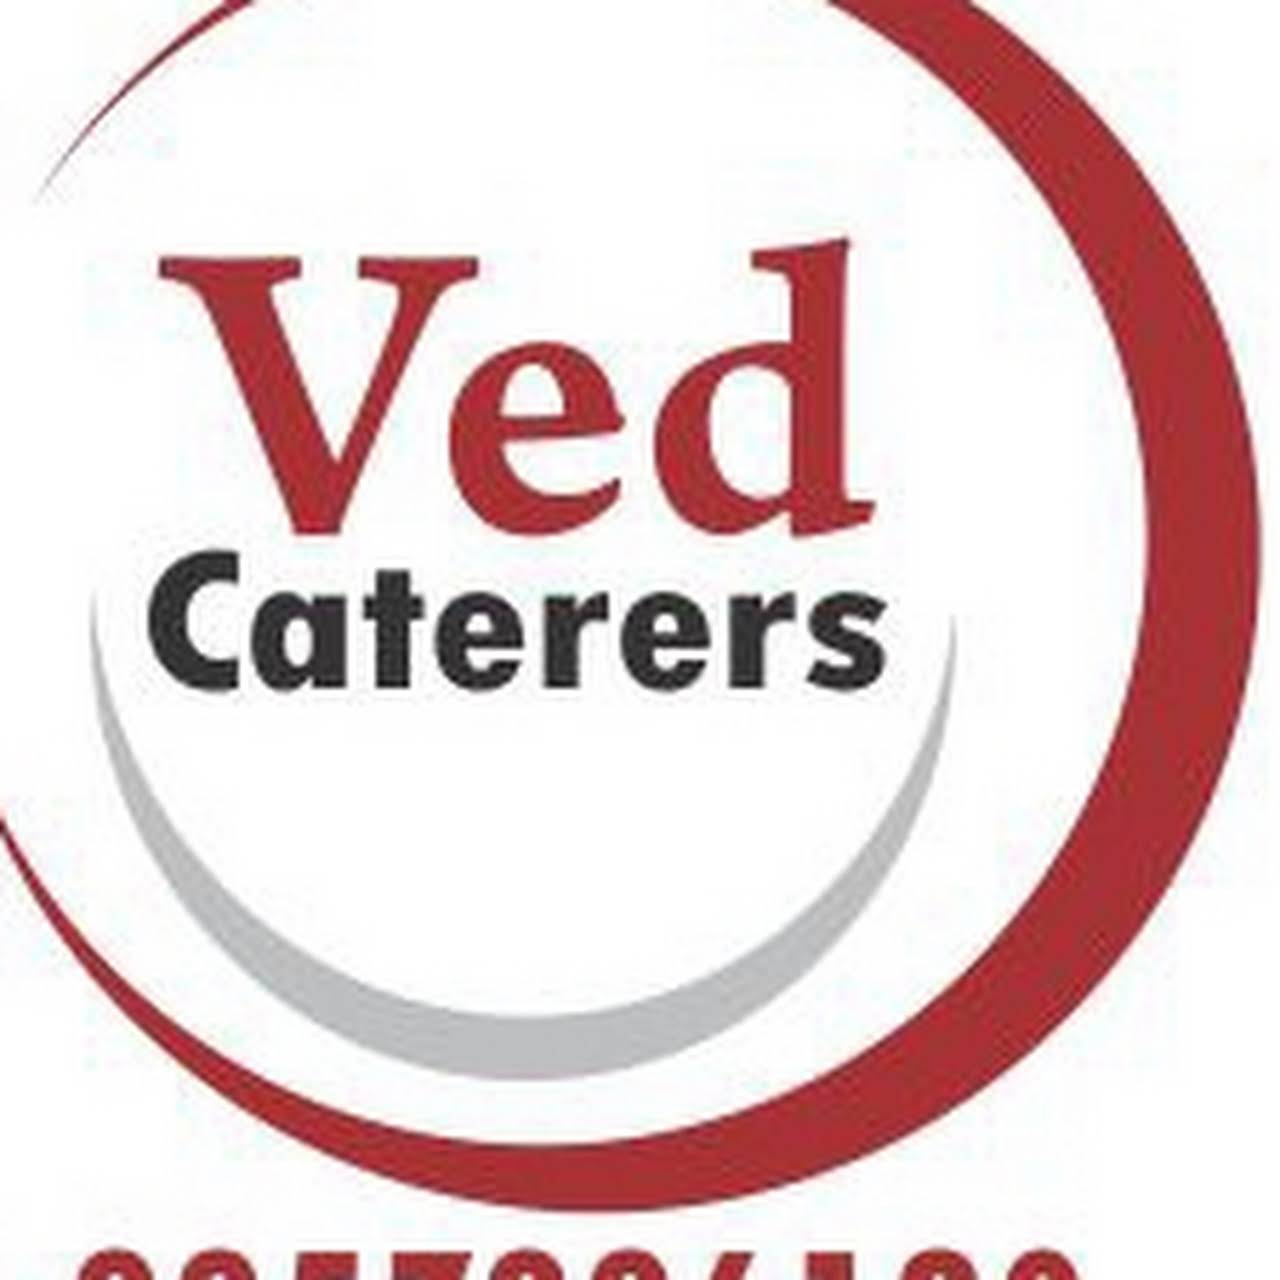 Ved Caterers|Banquet Halls|Event Services